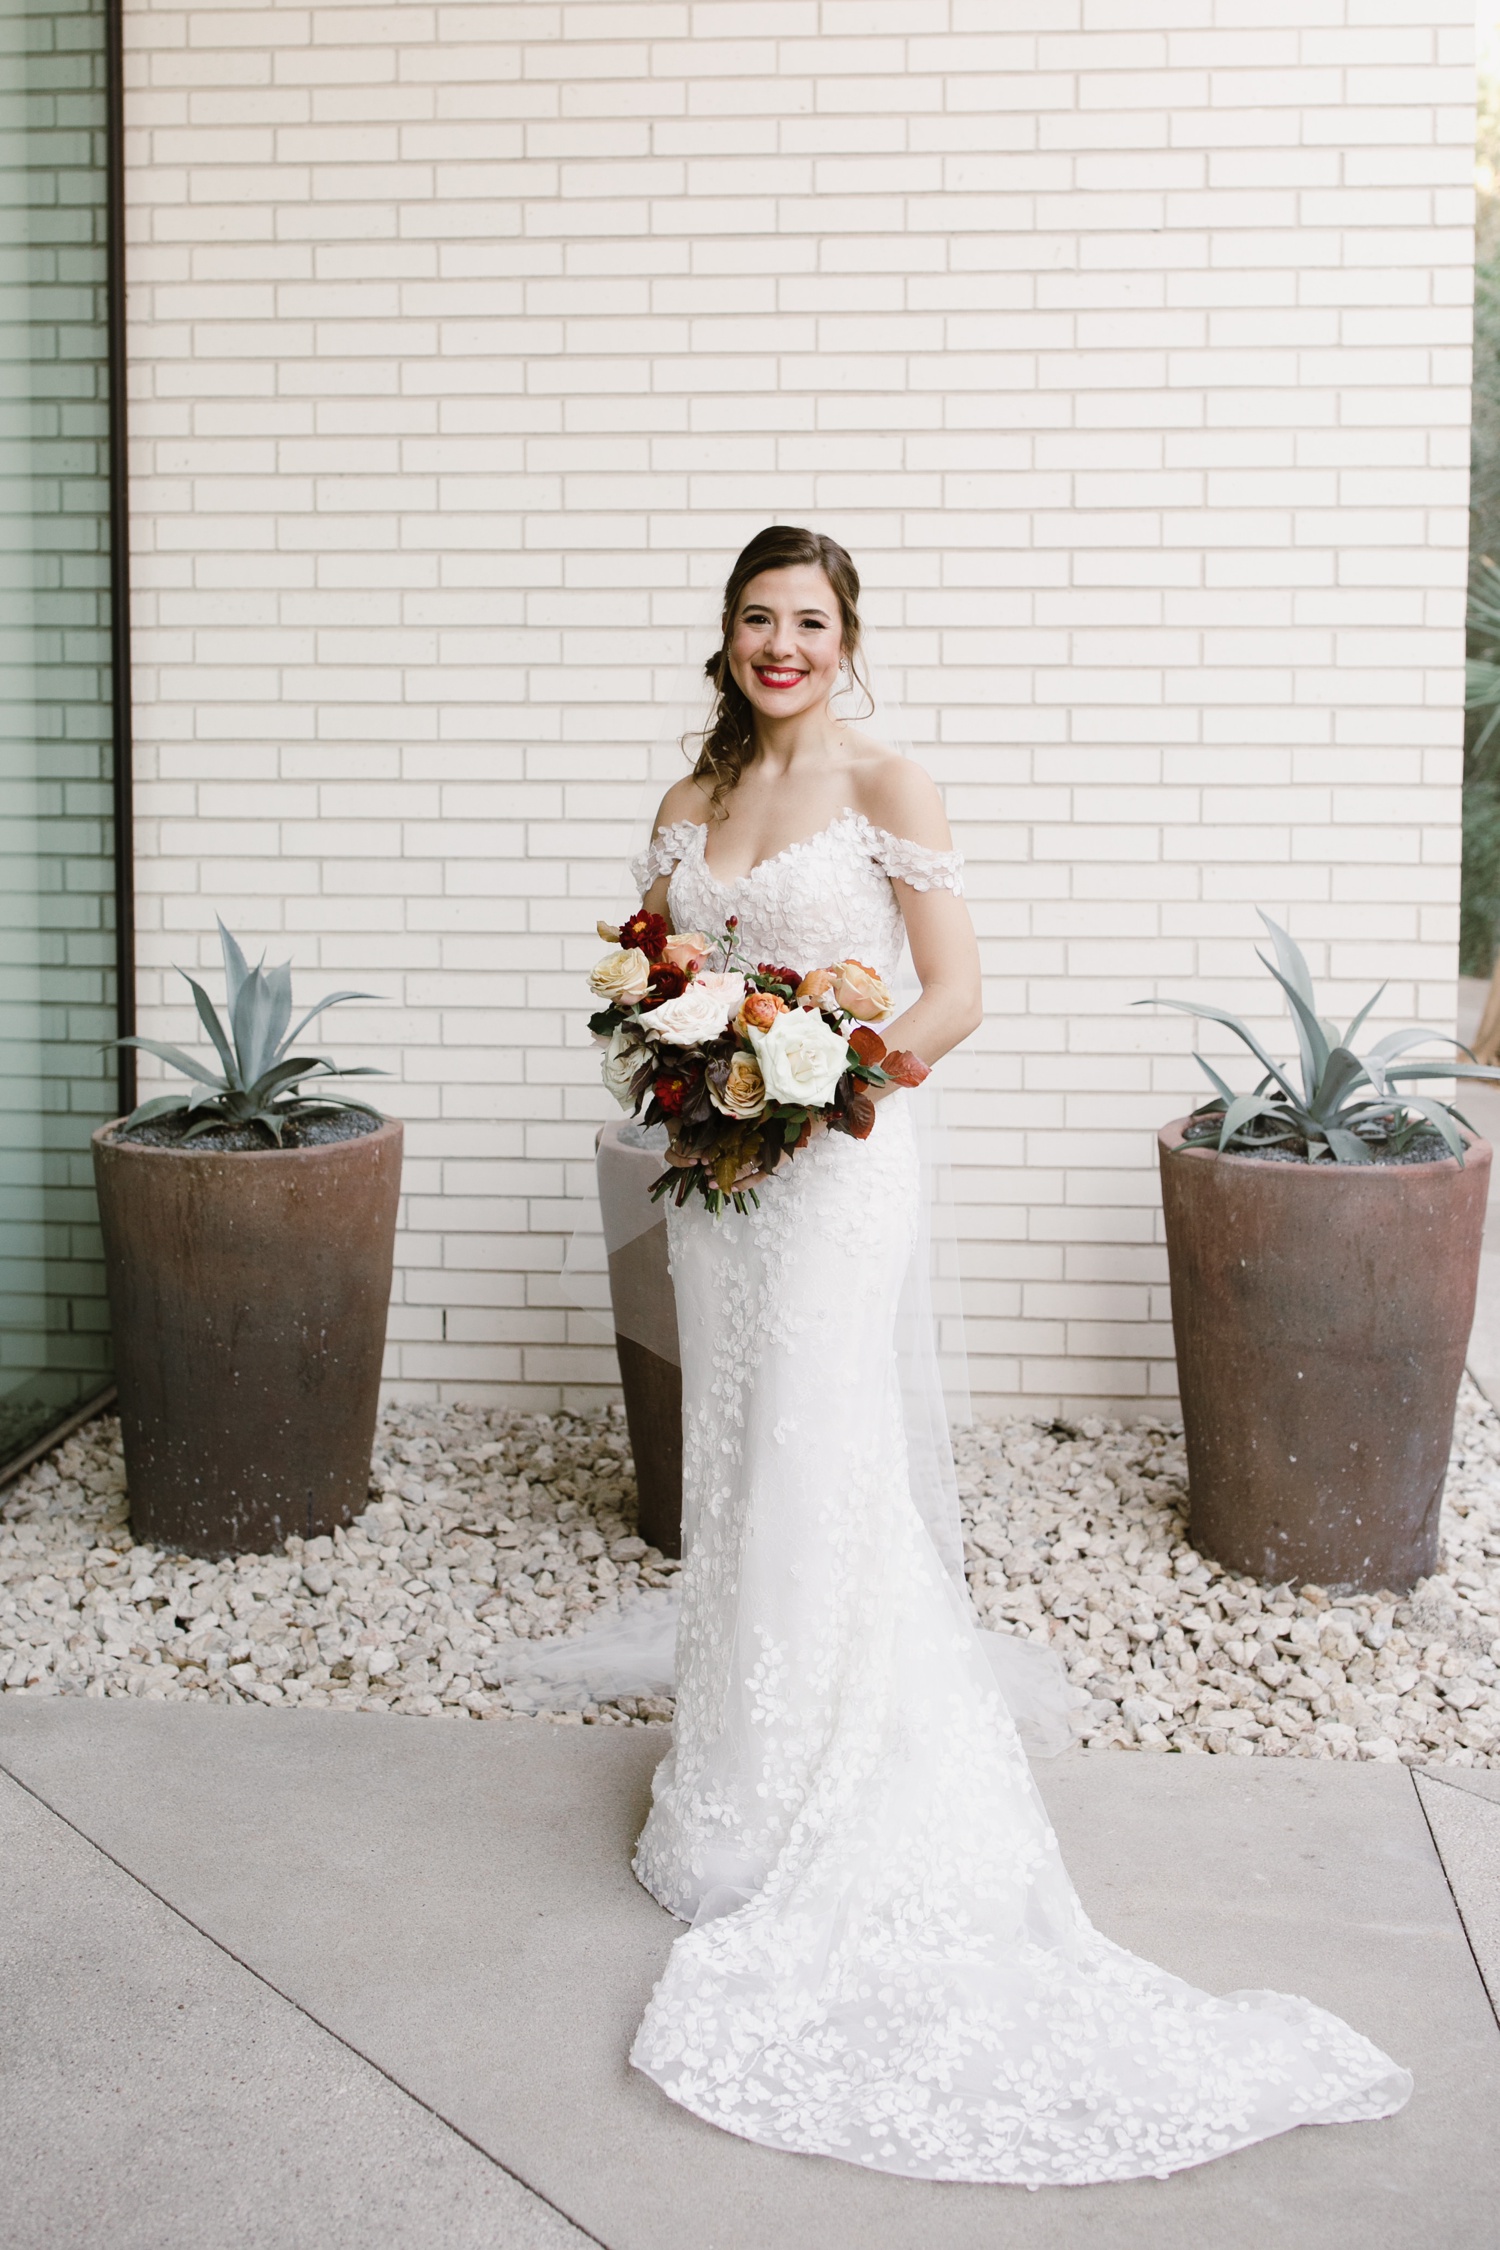 Bride in an off-the-shoulder wedding gown by Lazaro